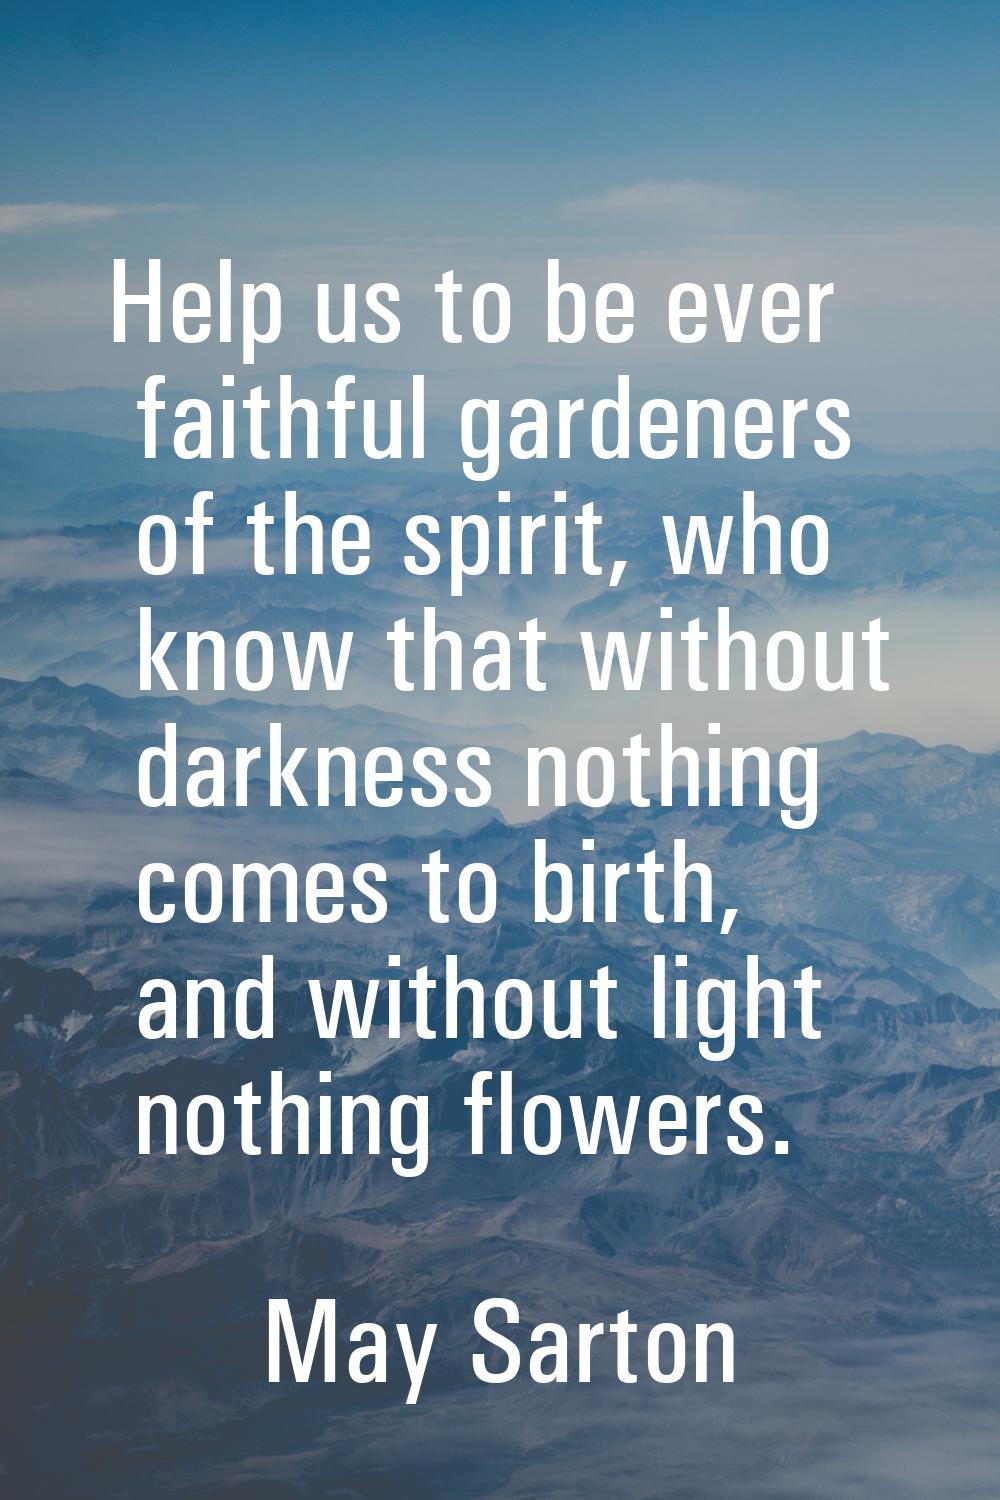 Help us to be ever faithful gardeners of the spirit, who know that without darkness nothing comes t